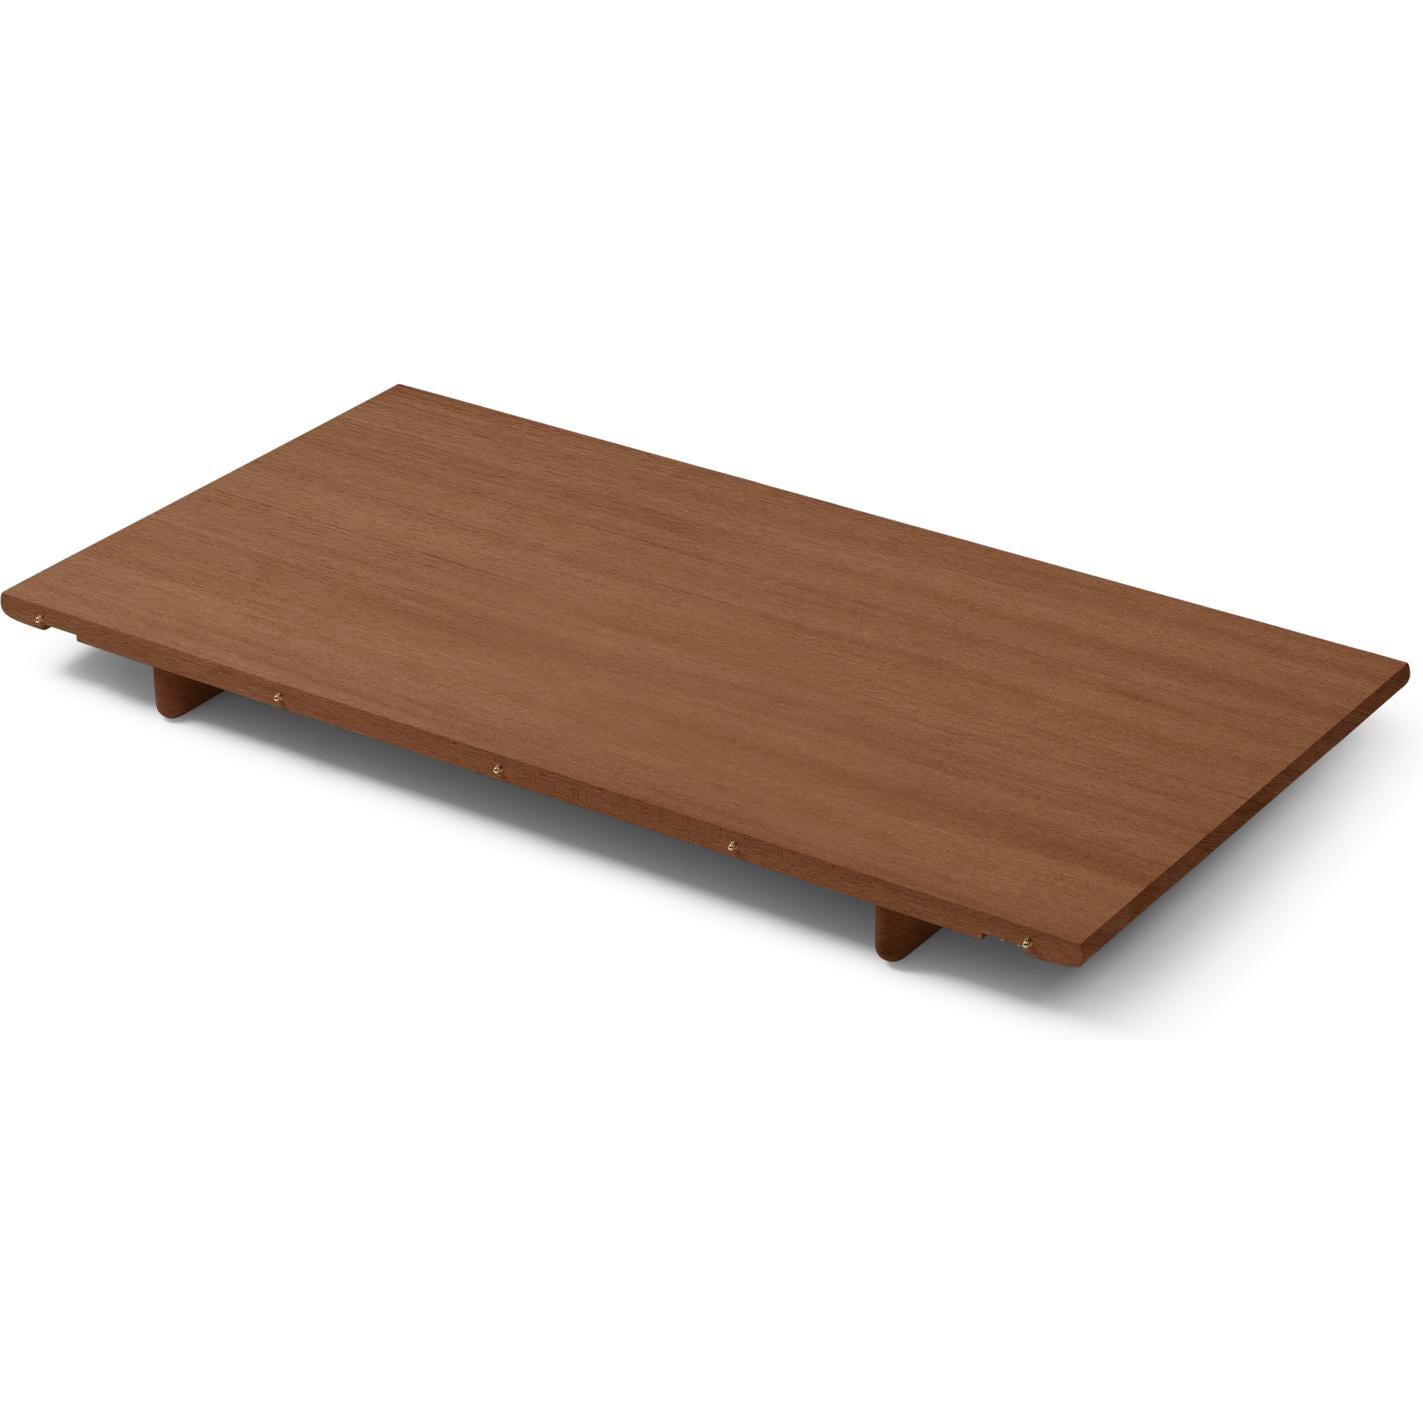 Carl Hansen Sat Plate For Ch338/Ch339 Tables, Mahogany Oiled